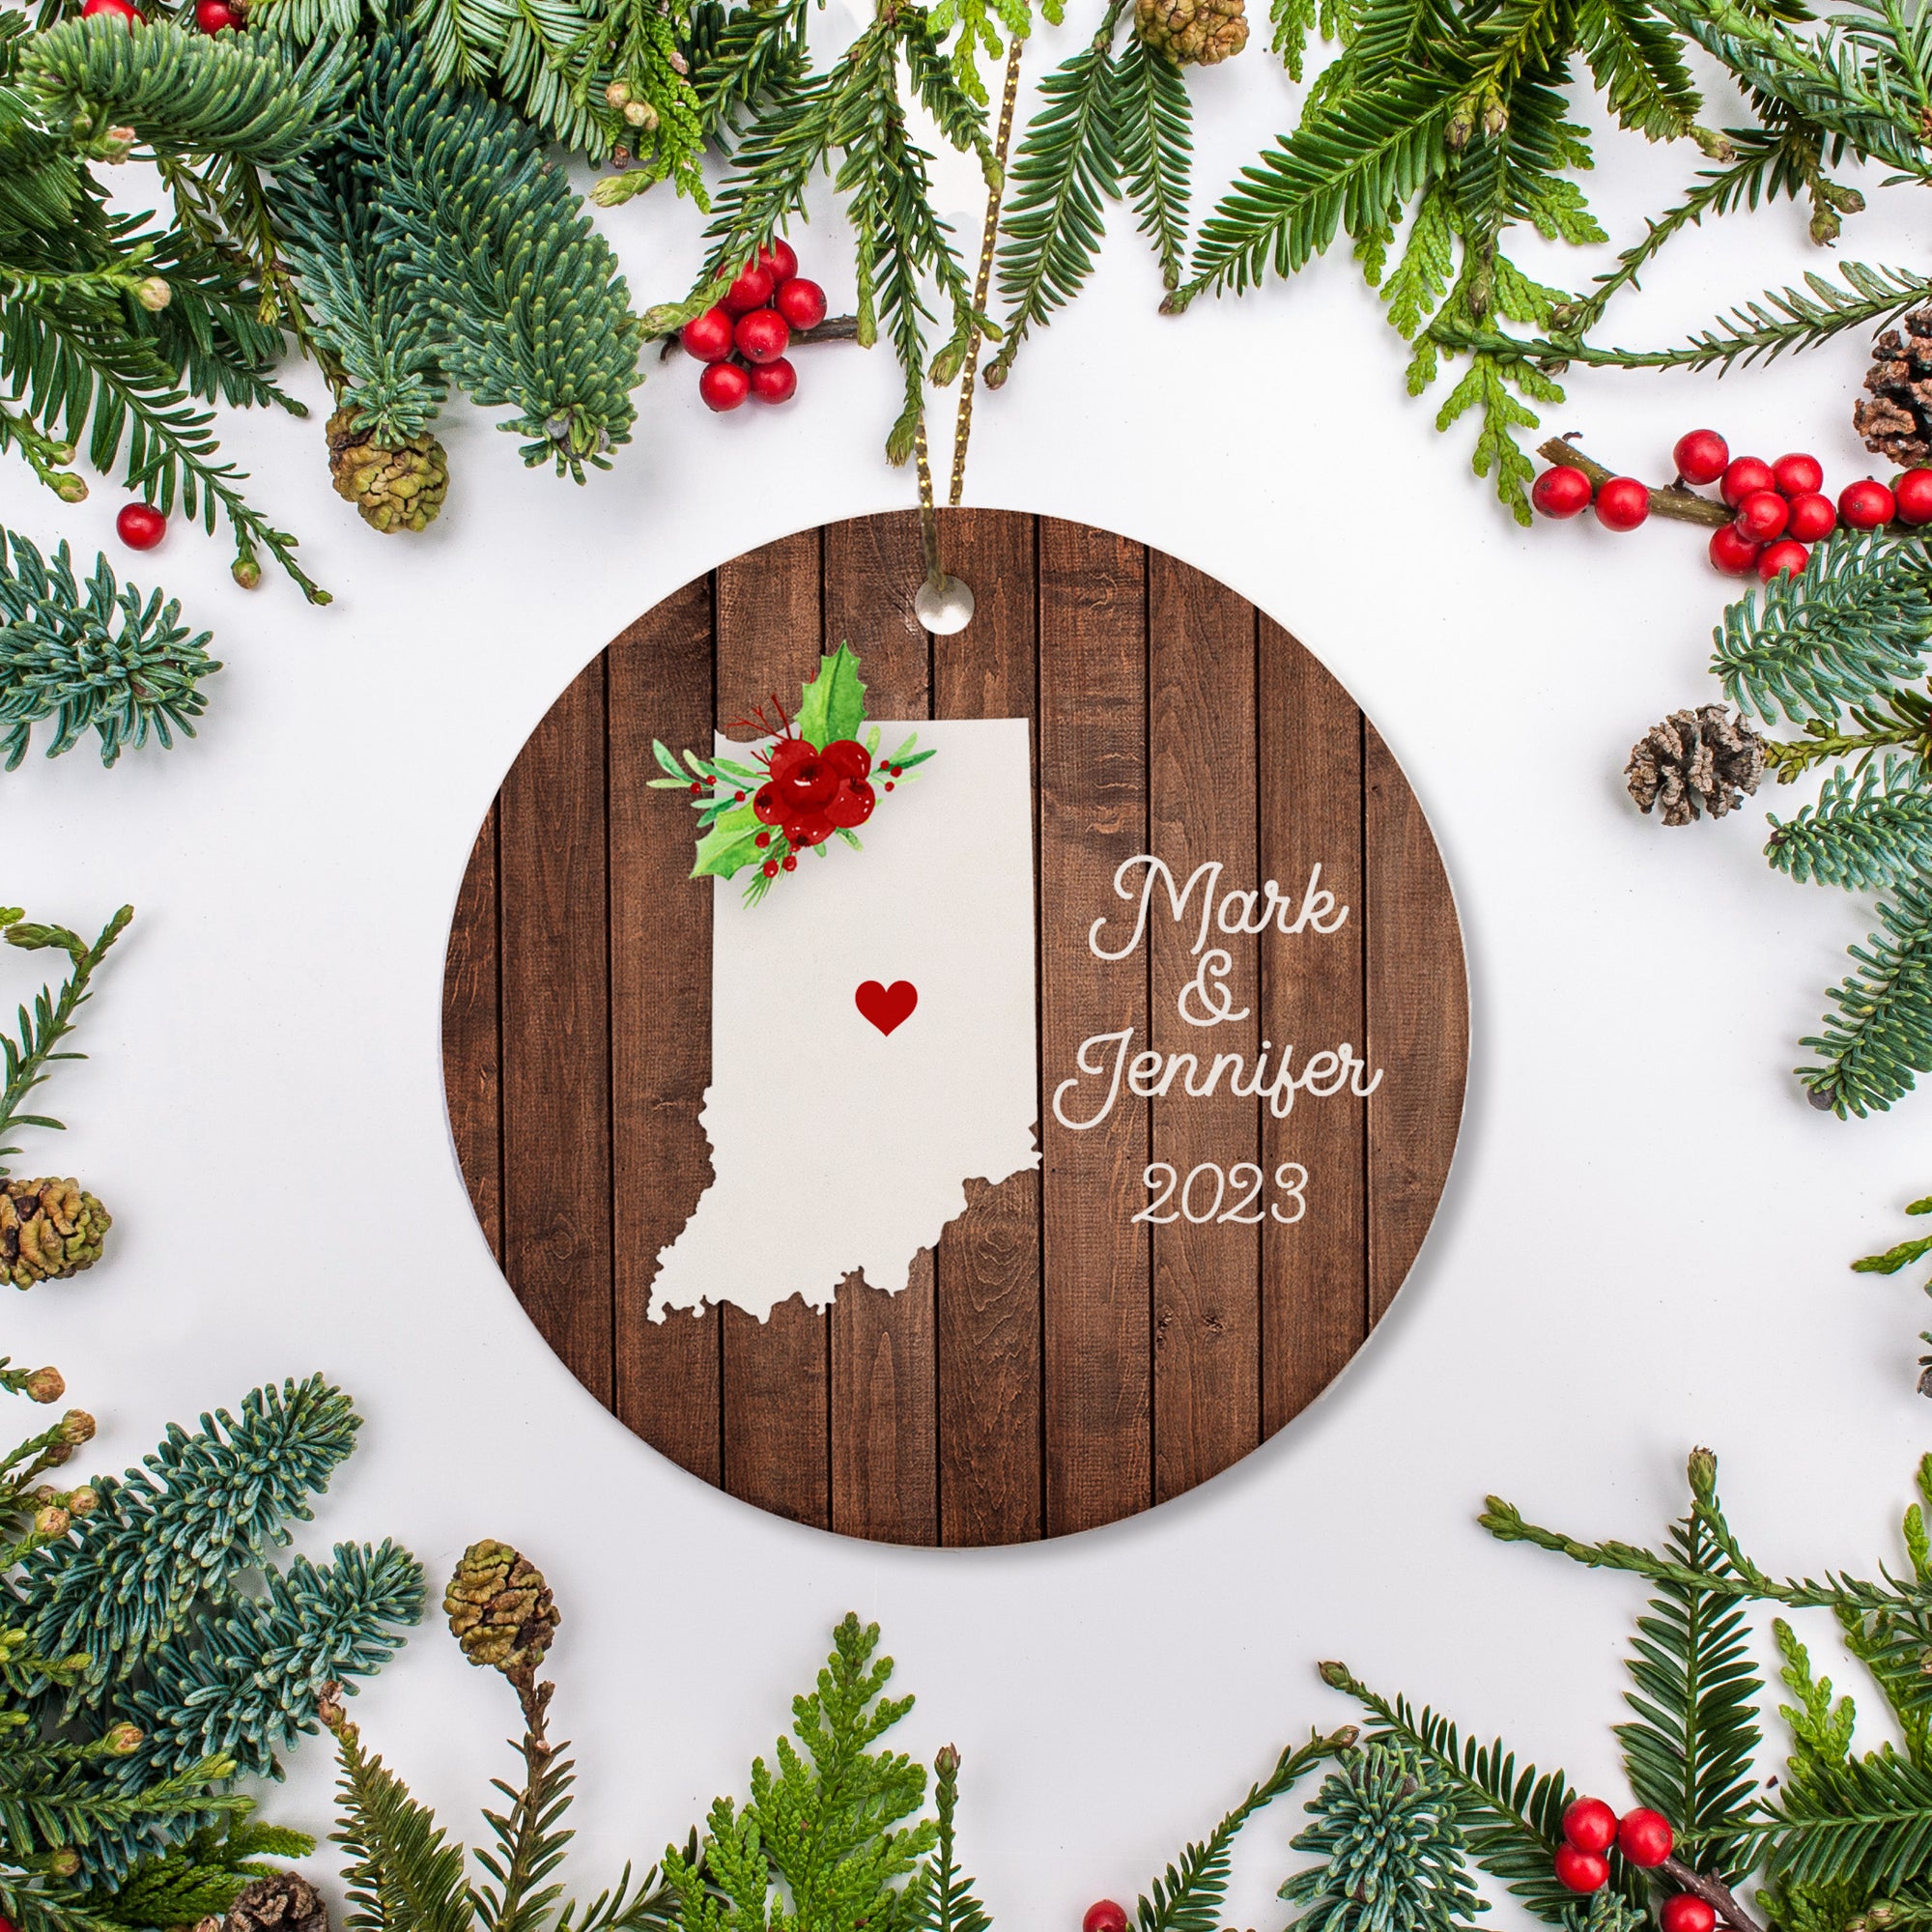 Indiana state christmas ornament. Personalized with your name, city, and year. Ceramic keepsake ornament with a gold hanging string. Great for a college student, new home owners, just moved, or vacation memory